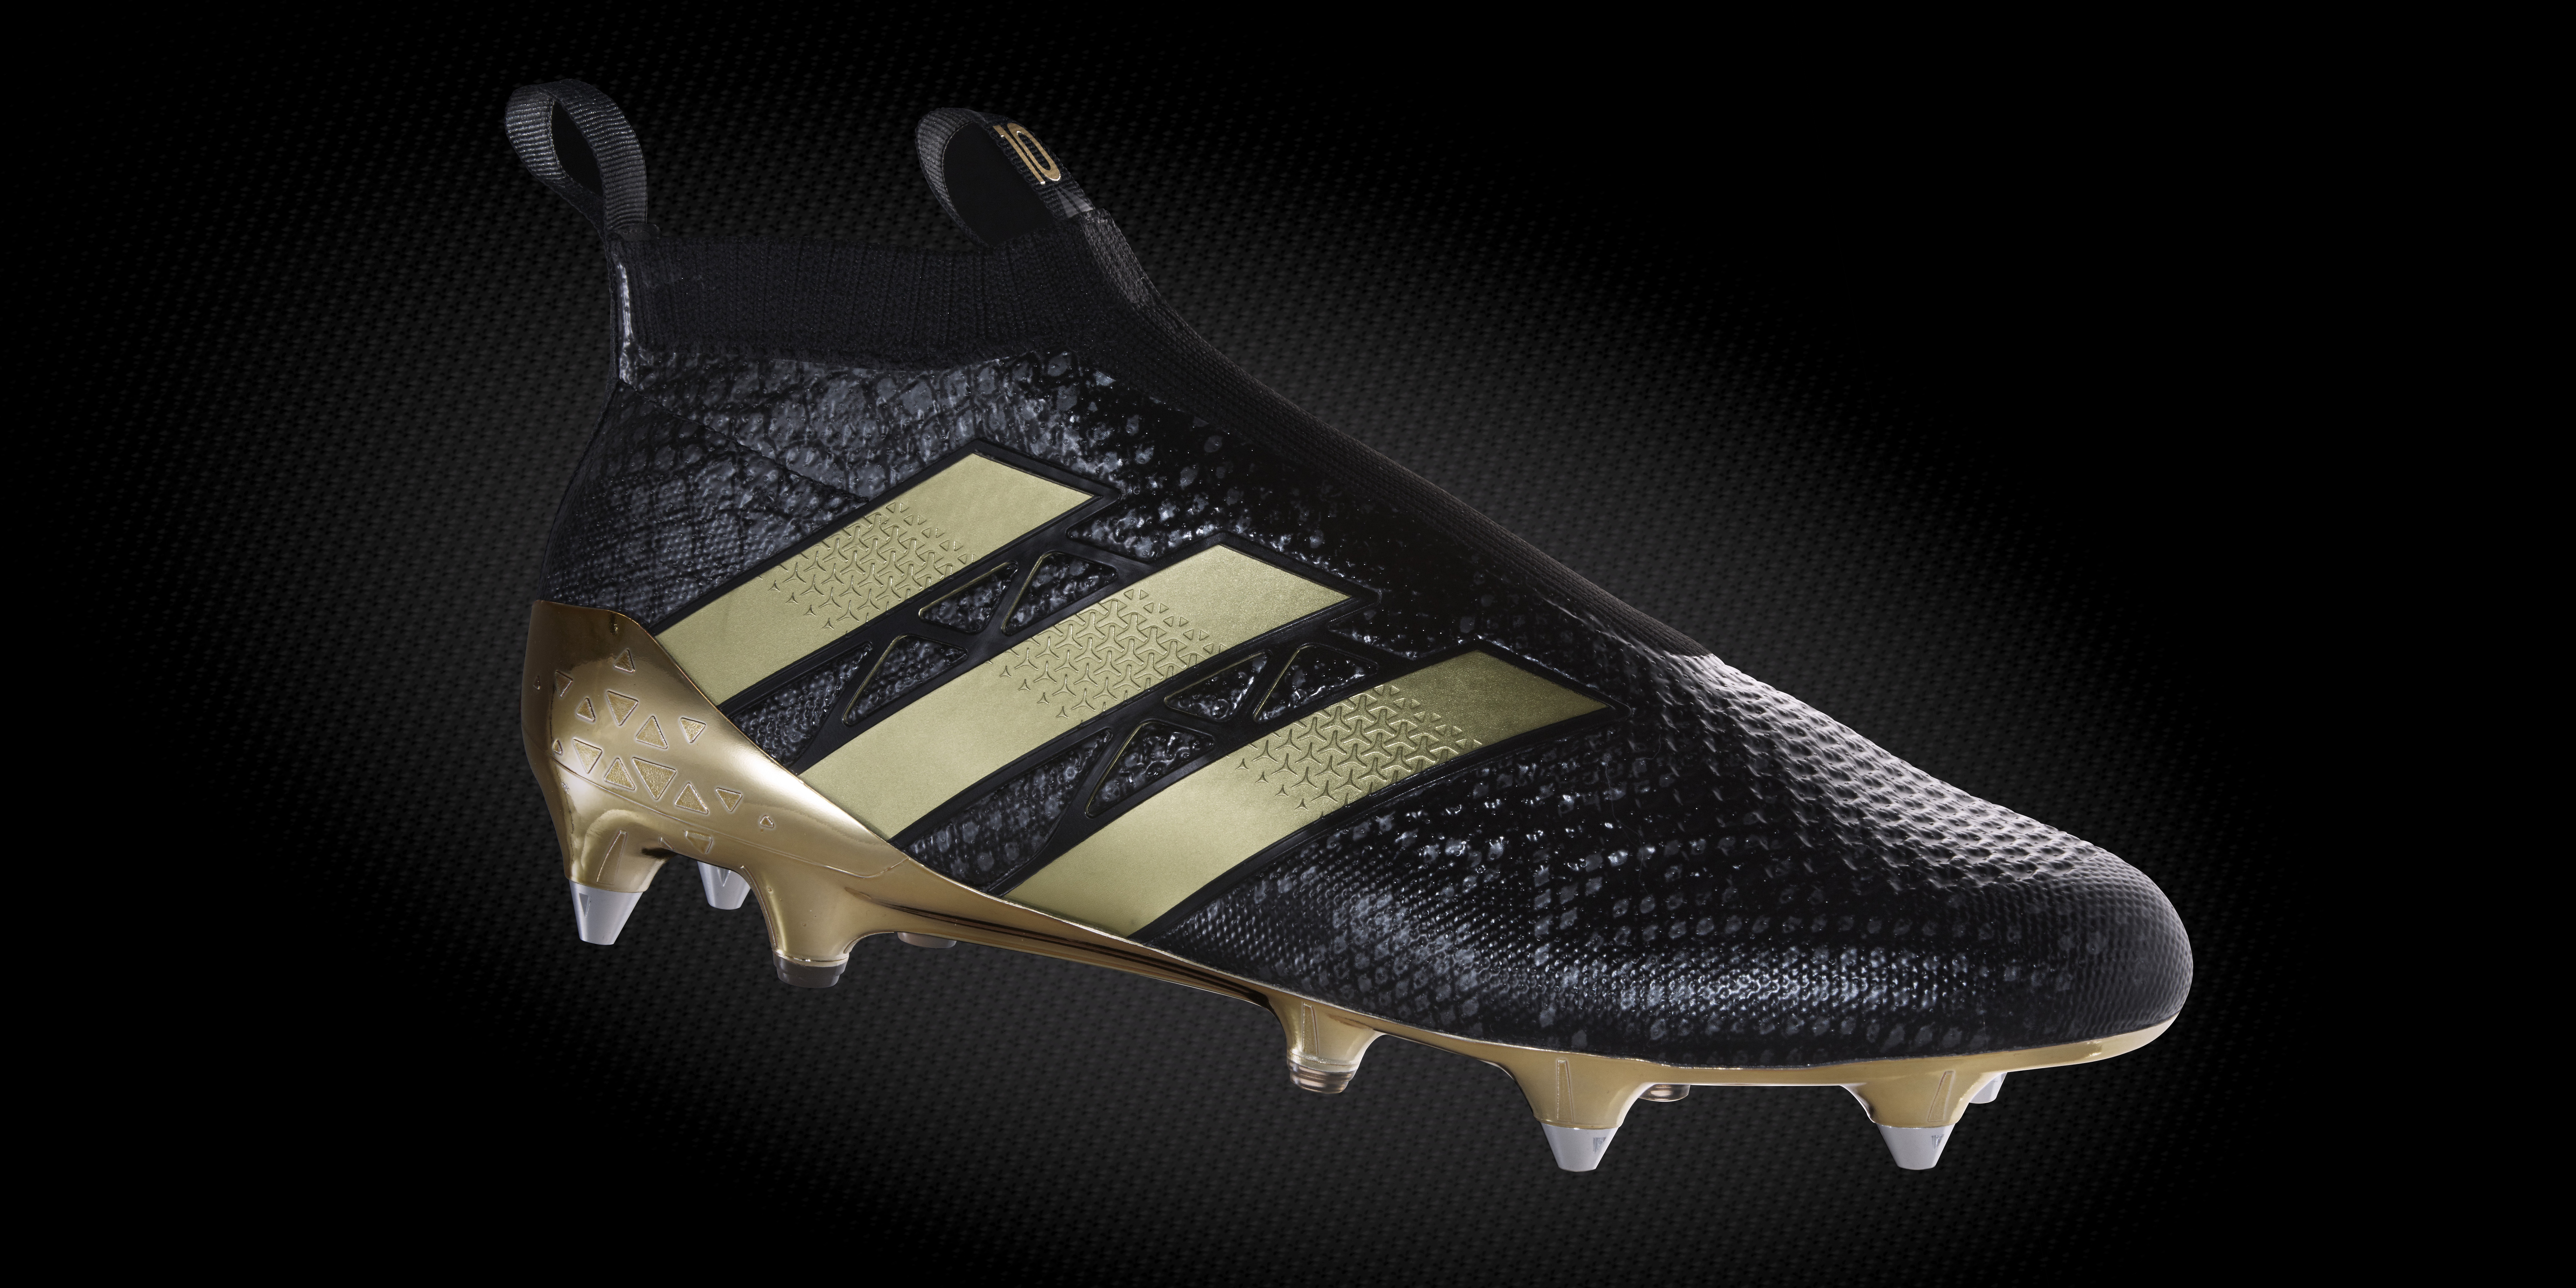 adidas gold boots